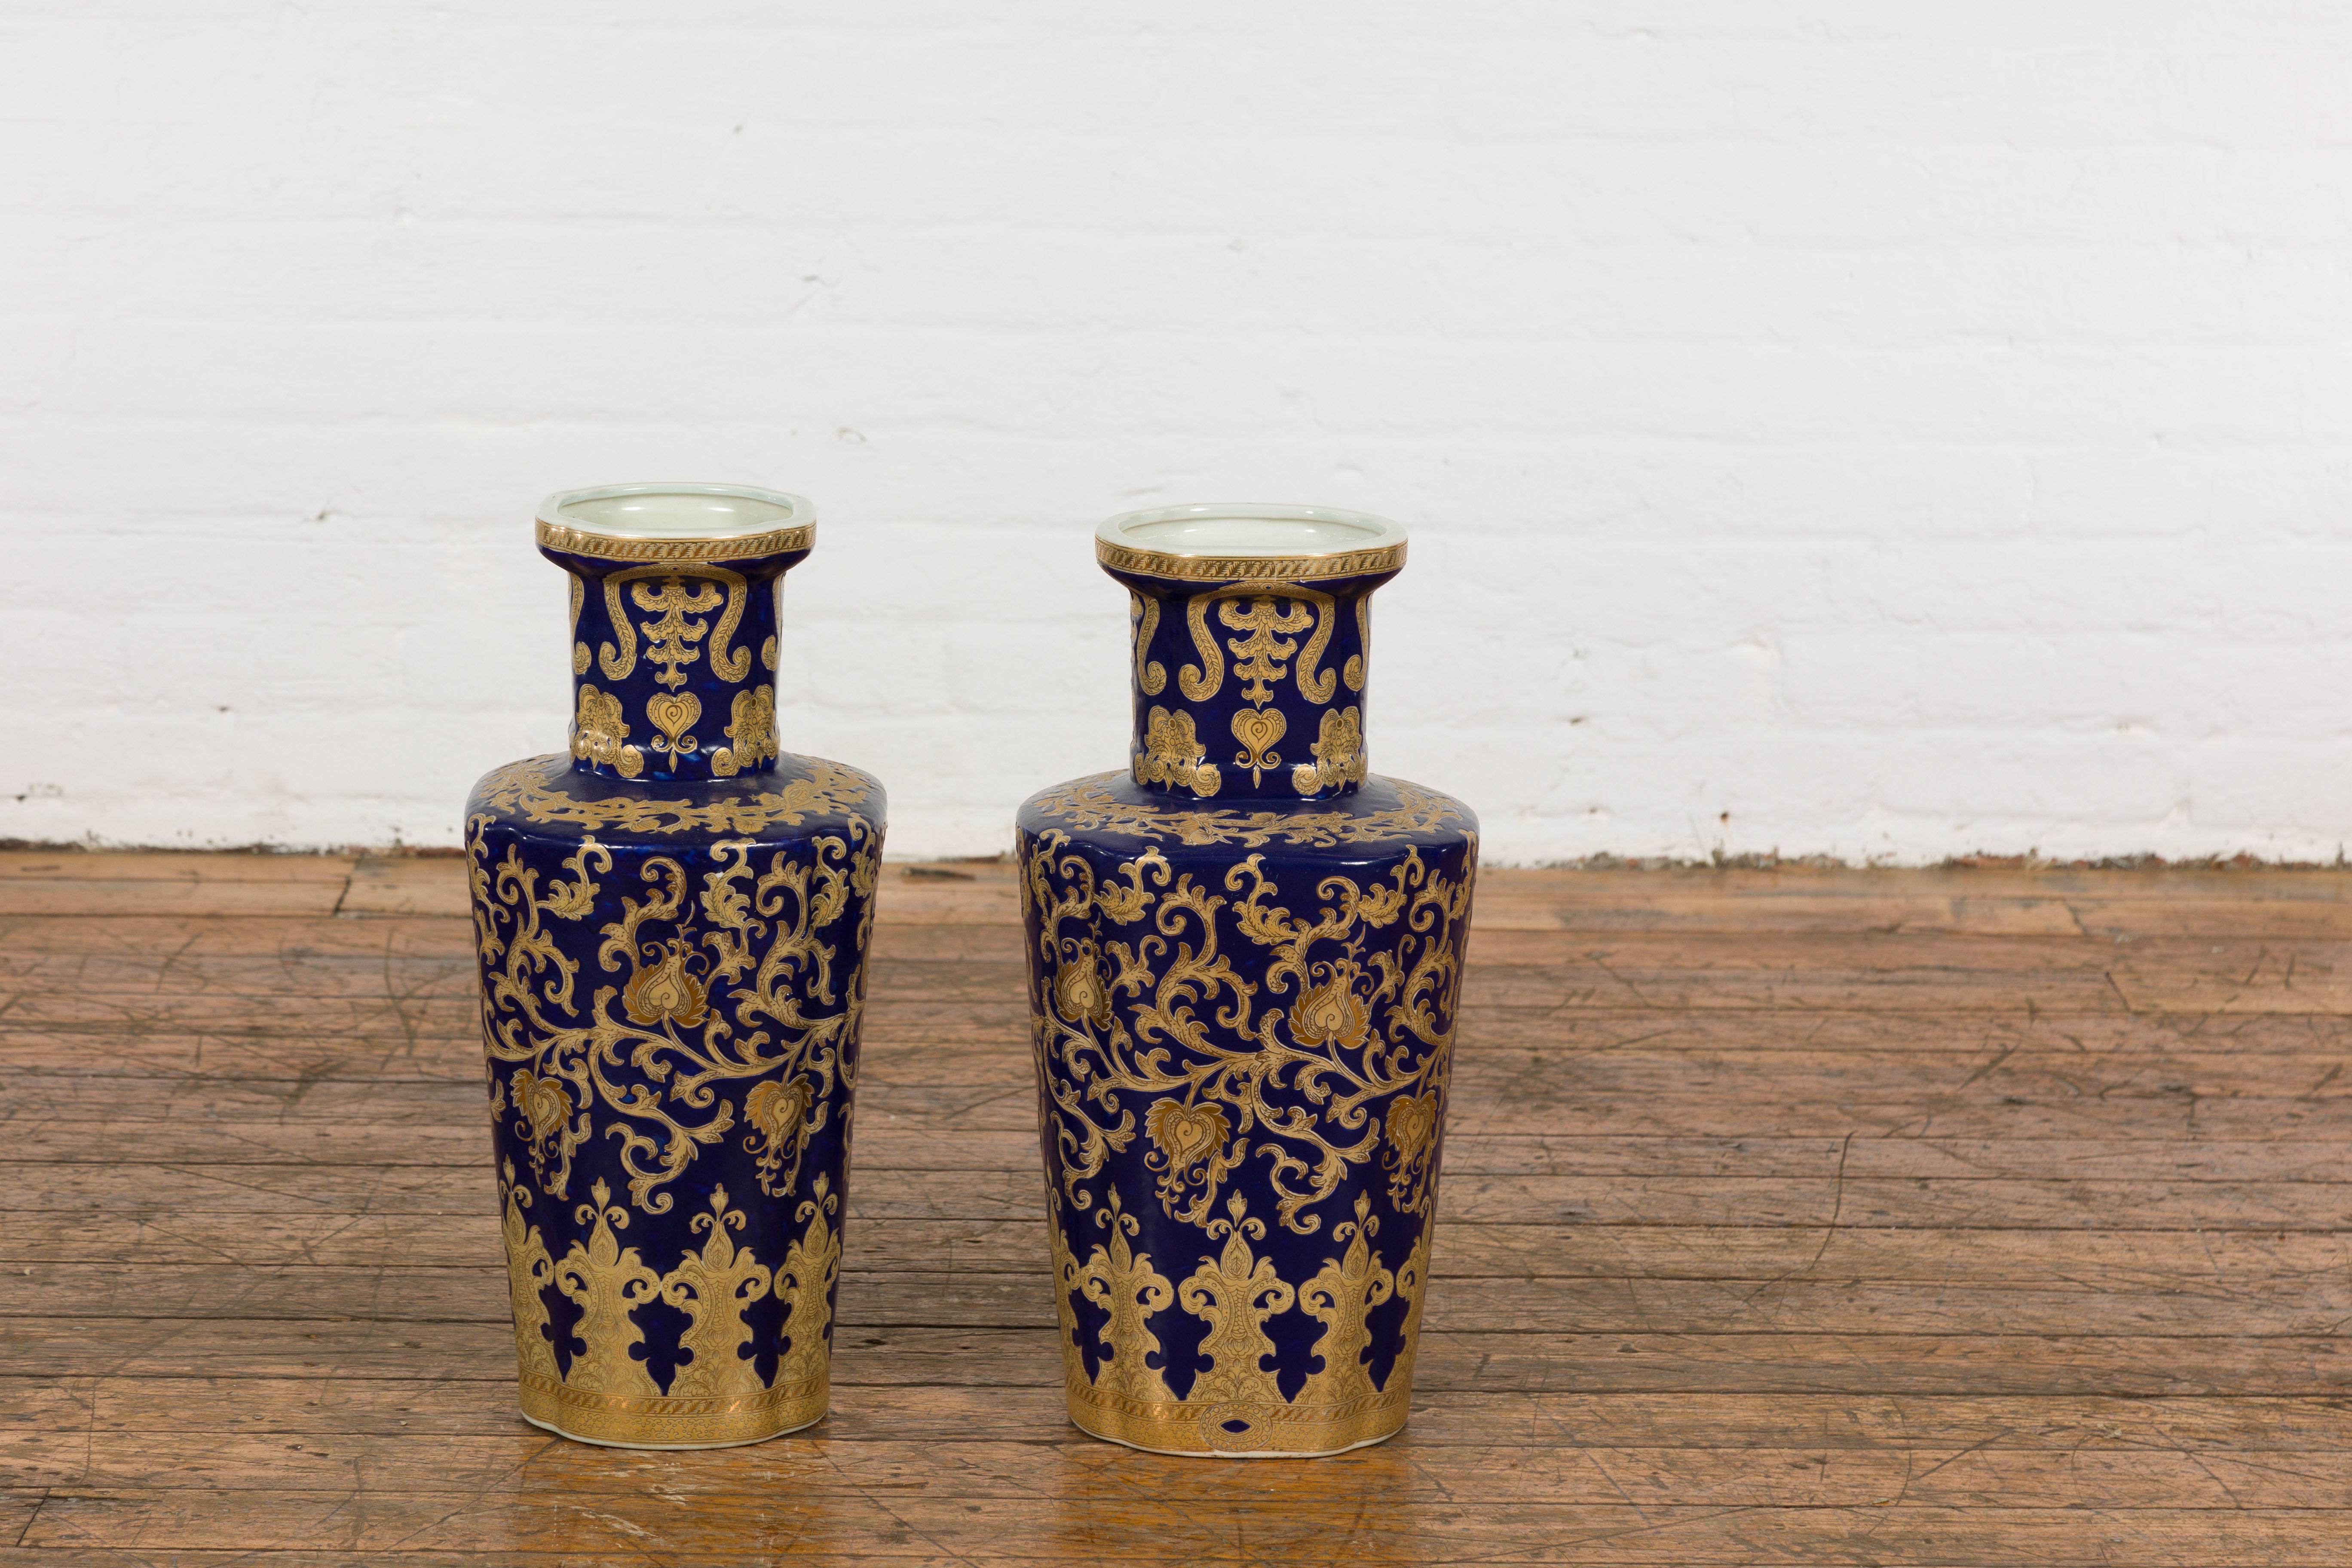 Pair of Dark Blue and Gold Vintage Vases with Intricate Design For Sale 8